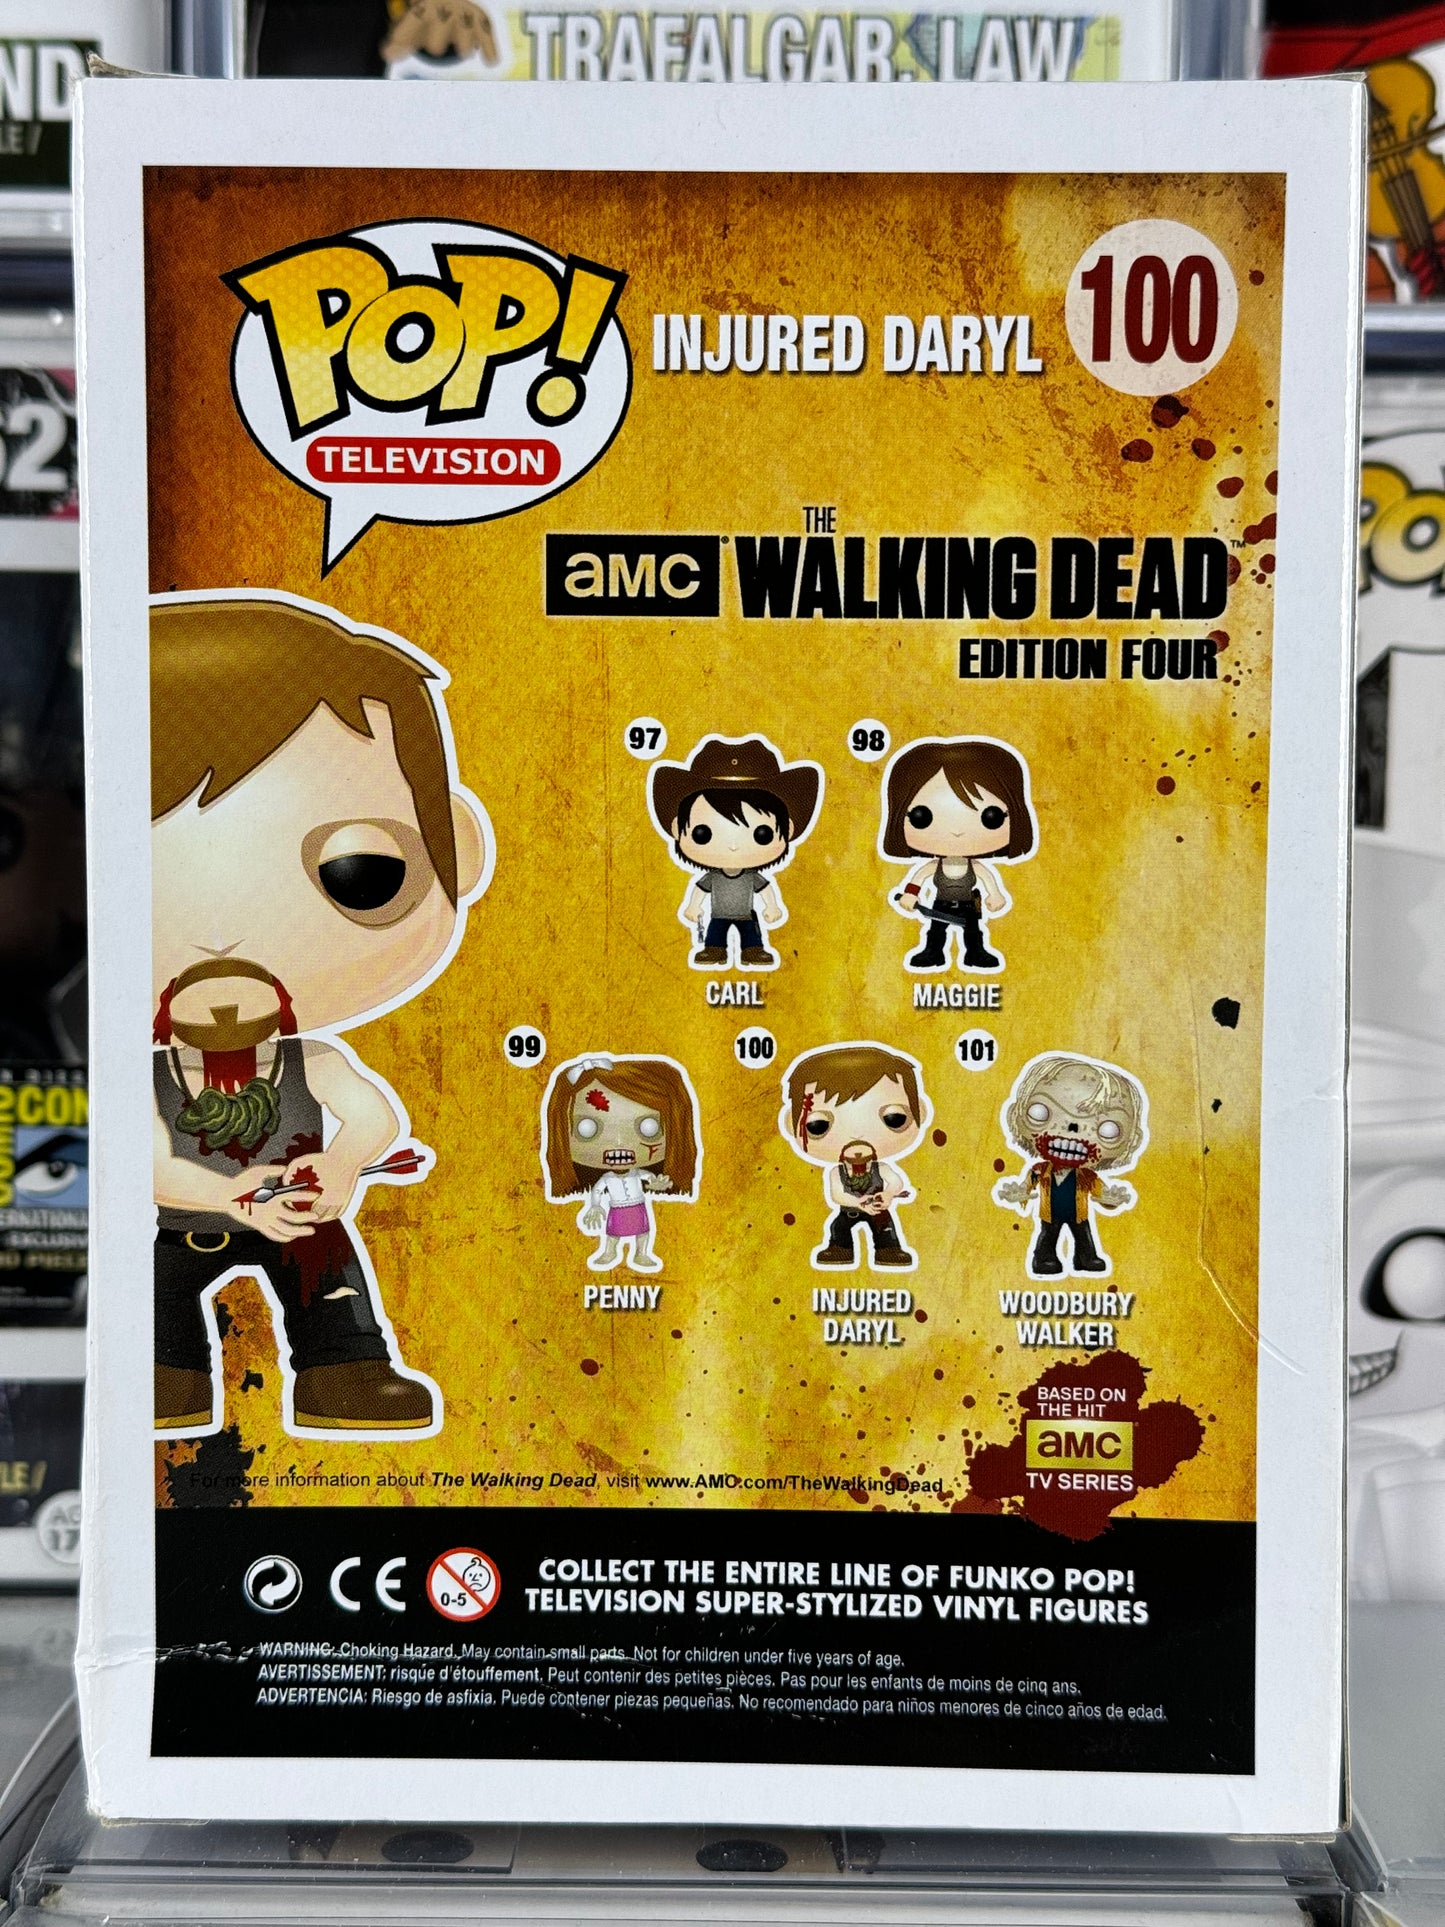 The Walking Dead - Injured Daryl (100) Vaulted